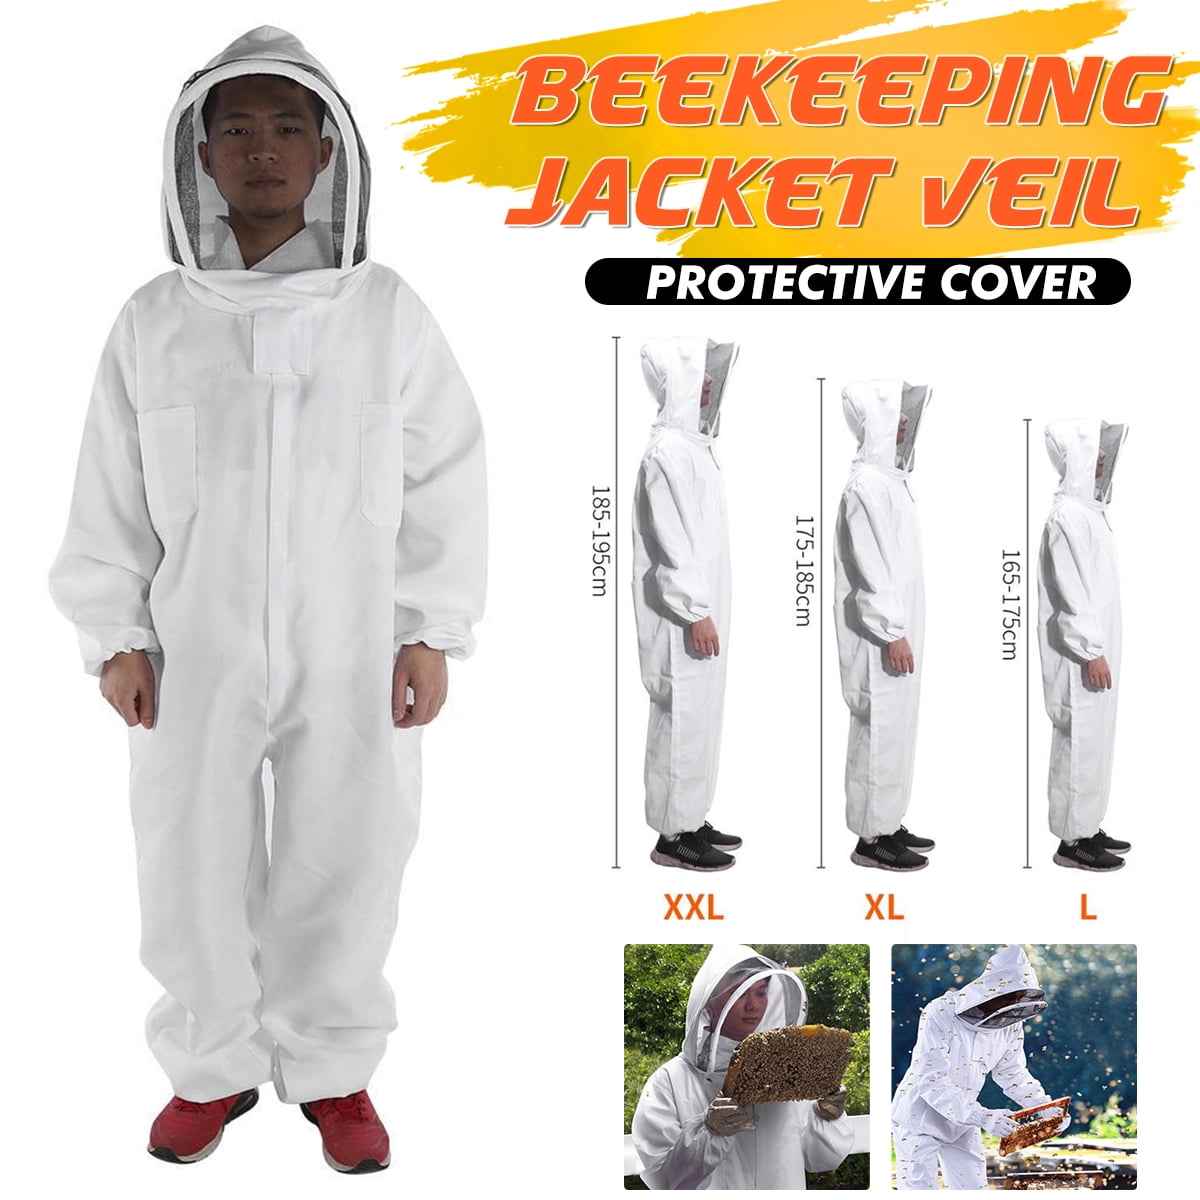 2XL Beekeeping Protective Costume Anti Bee 3 Layers Suit Jacket Coat White 